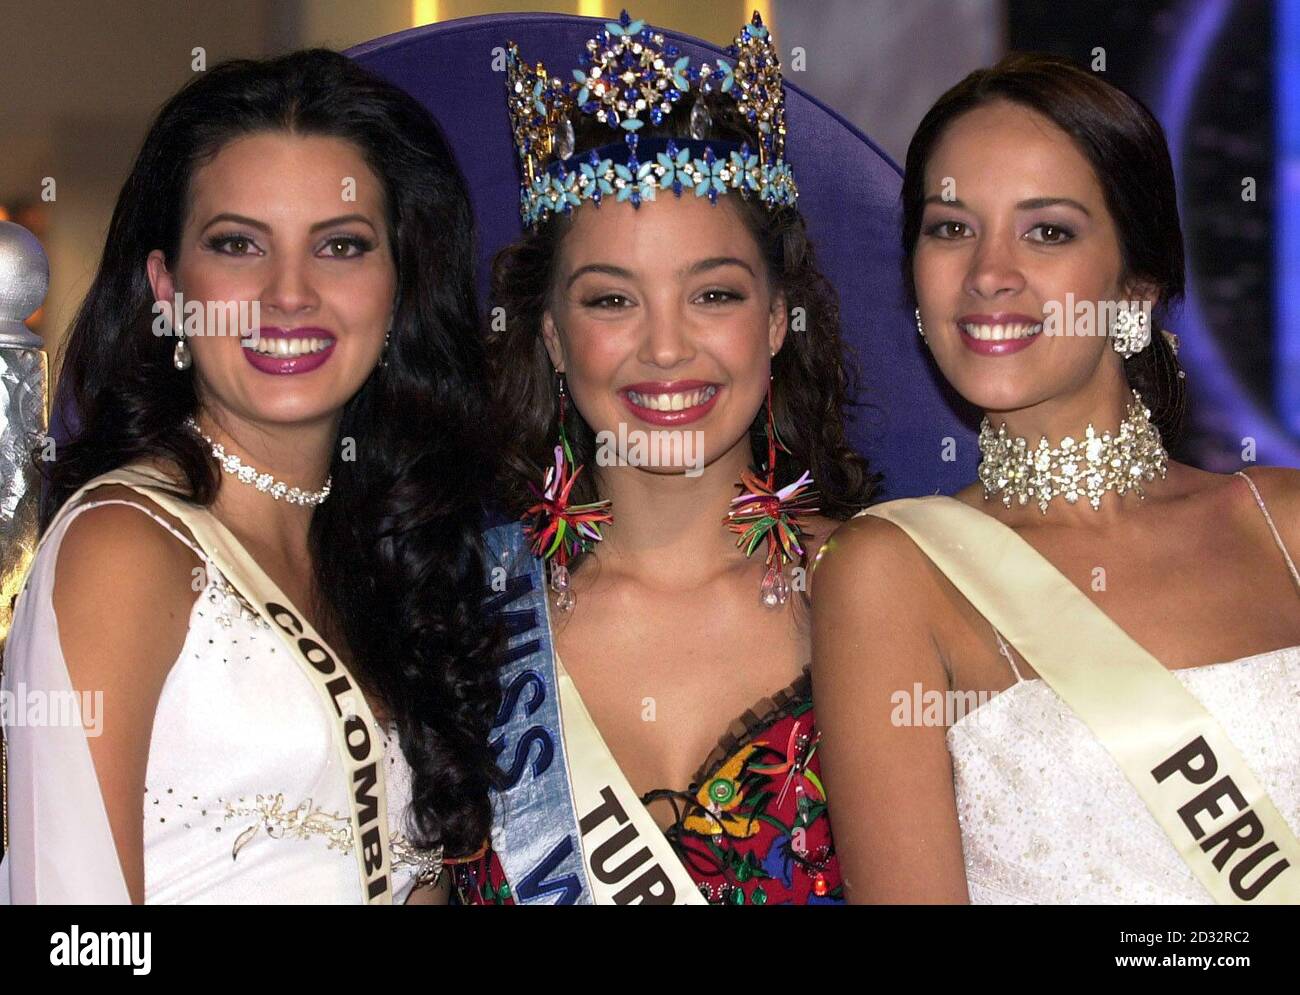 The newly crowned Miss World, Miss Turkey Miss Azra Akin (centre) with runner up Miss Colombia, Natalie Peralta, (left) and Miss Peru Marina Mora Montero (right) at Alexandra Palace in London. Stock Photo